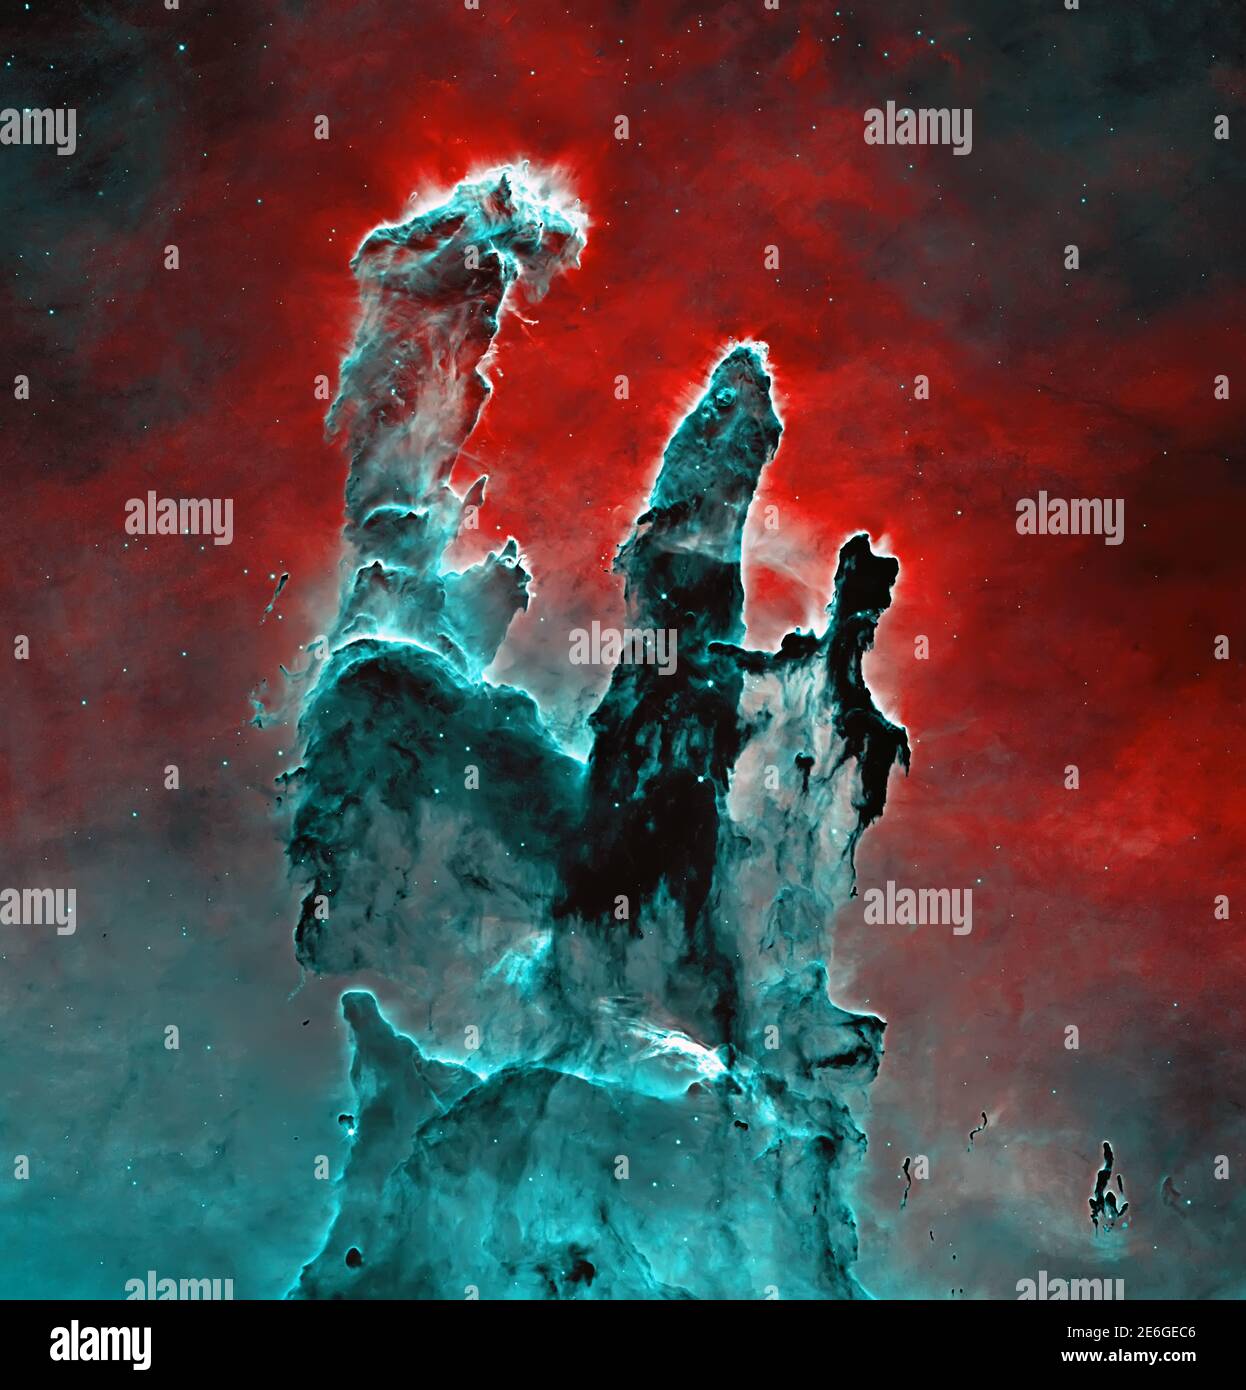 Pillars of Creation, Supernova Core pulsar neutron star. Elements of this image furnished by NASA. Stock Photo